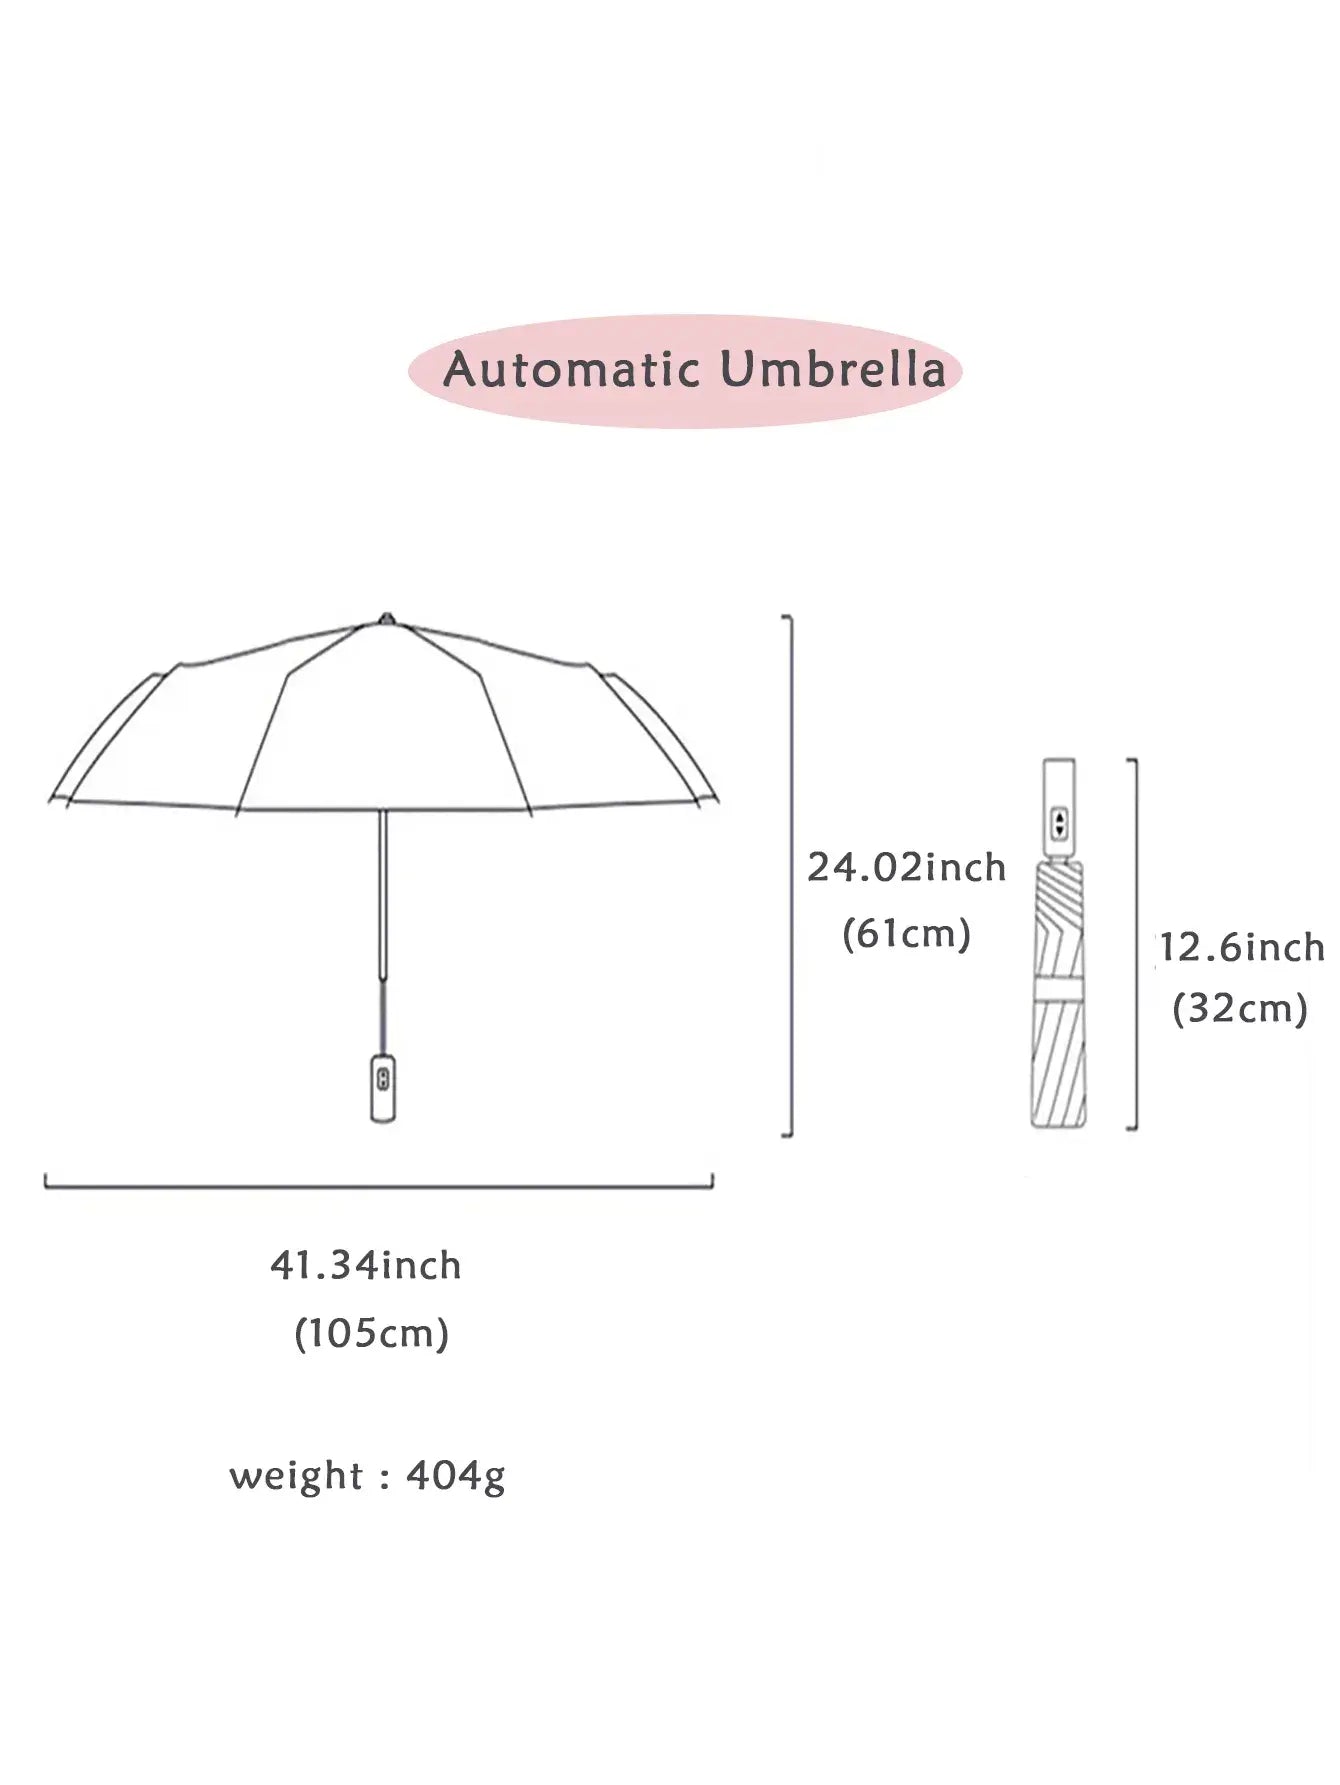 Windproof Double Layer Fully Automatic Resistant Umbrella